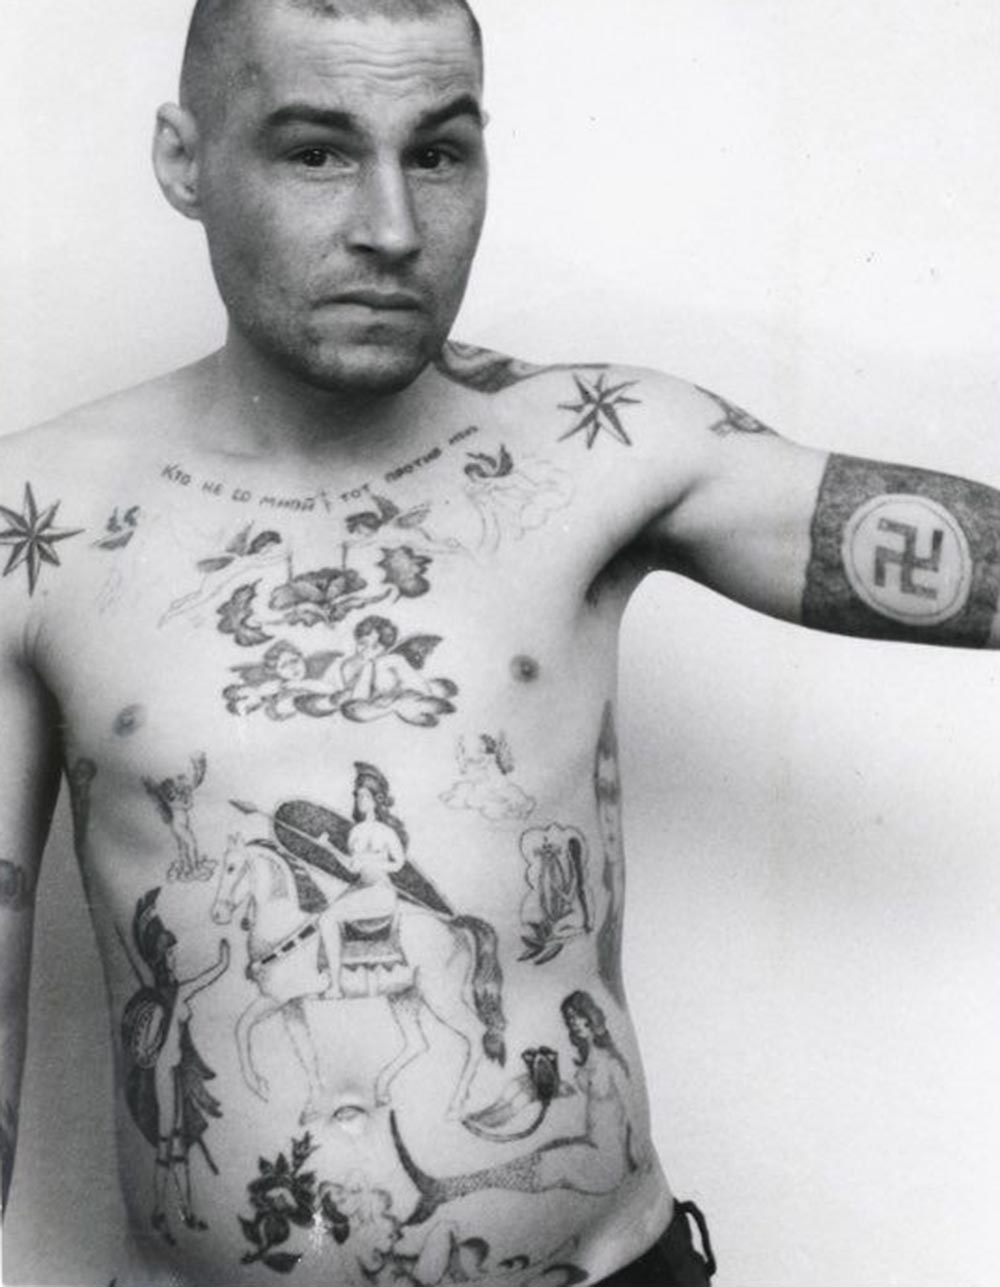 Text across the chest reads 'He who is not with me is against me.' The swastika and Nazi symbols may mean the owner has fascist sympathies, though they are more usually made as a protest and display of aggression toward the prison or camp administration. During the Soviet period the authorities often removed these tattoos by force either surgically or by using an etching method. A tattoo of a mermaid can indicate a sentence for rape of a minor, or child molestation. In prison jargon the nickname for a person who commits this type of crime is 'amurik,' meaning 'cupid', 'shaggy,' or a universal 'all rounder.' They are 'lowered' in status by being forcibly sodomised by other prisoners, sometimes in groups.